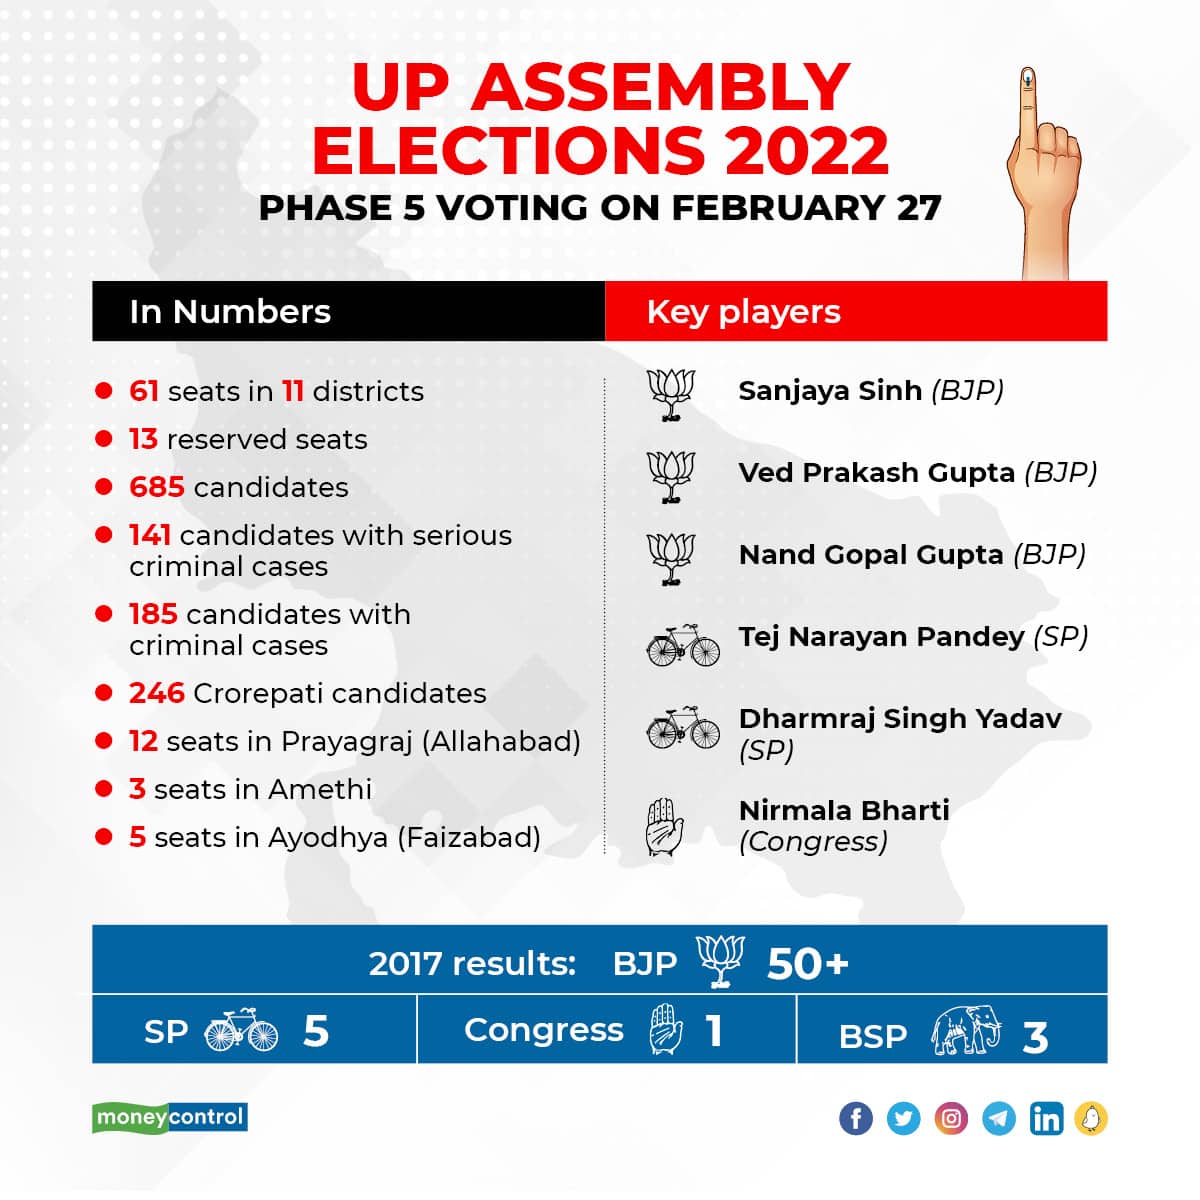 This round of voting is scheduled to be held for 61 seats across 11 districts, including Amethi, Ayodhya (Faizabad), Barabanki, Prayagraj (Allahabad), on February 27.